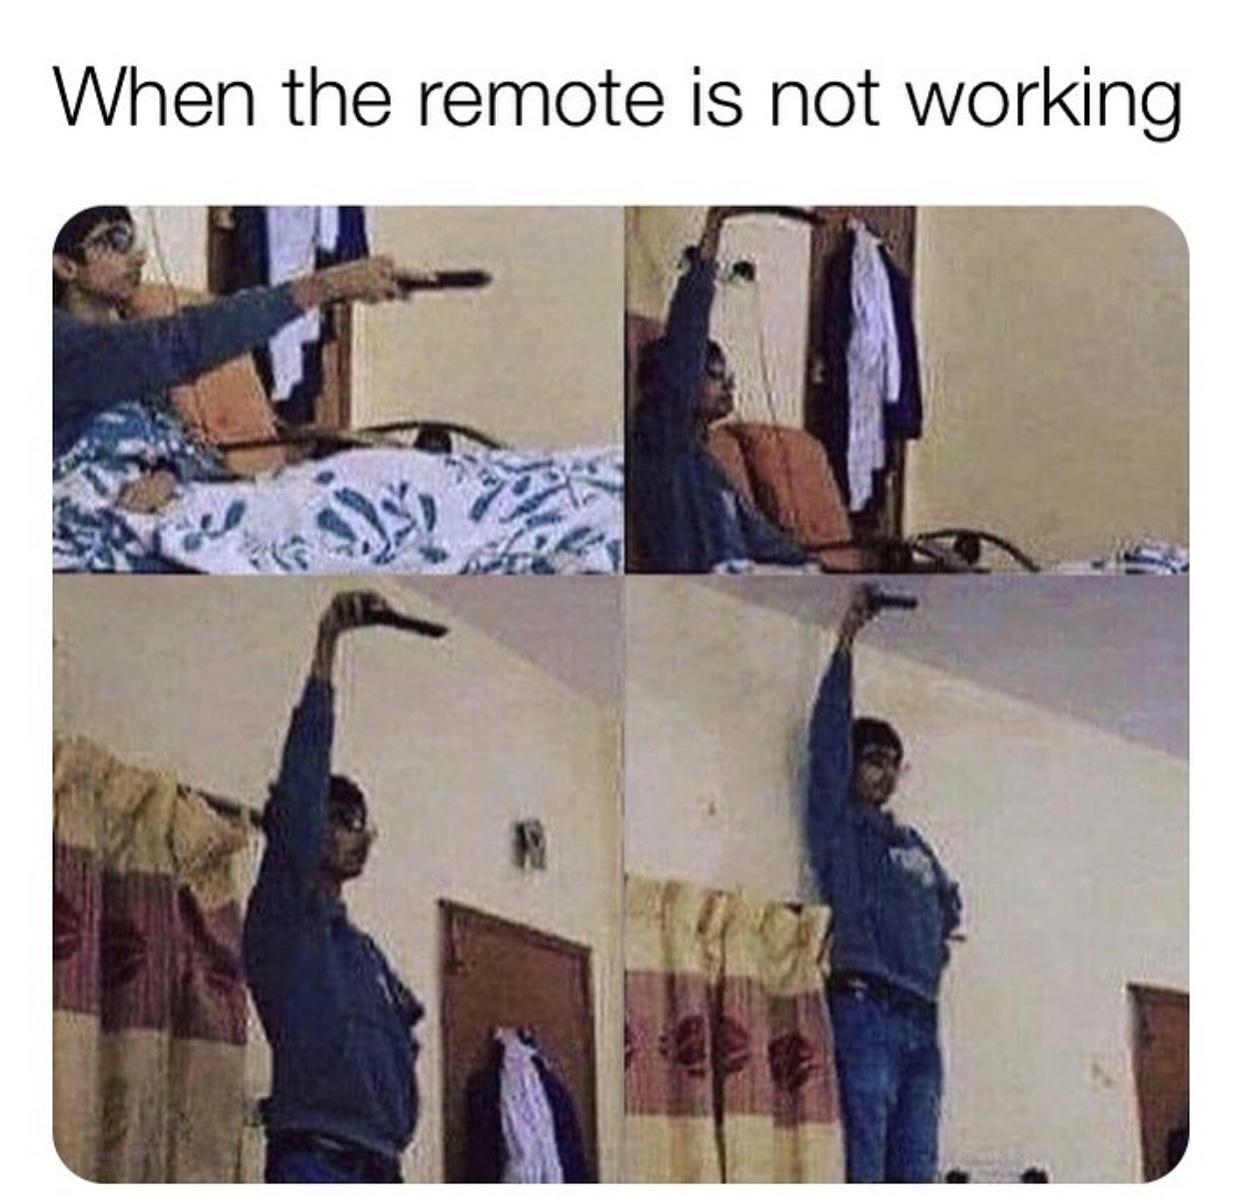 When the remote is not working